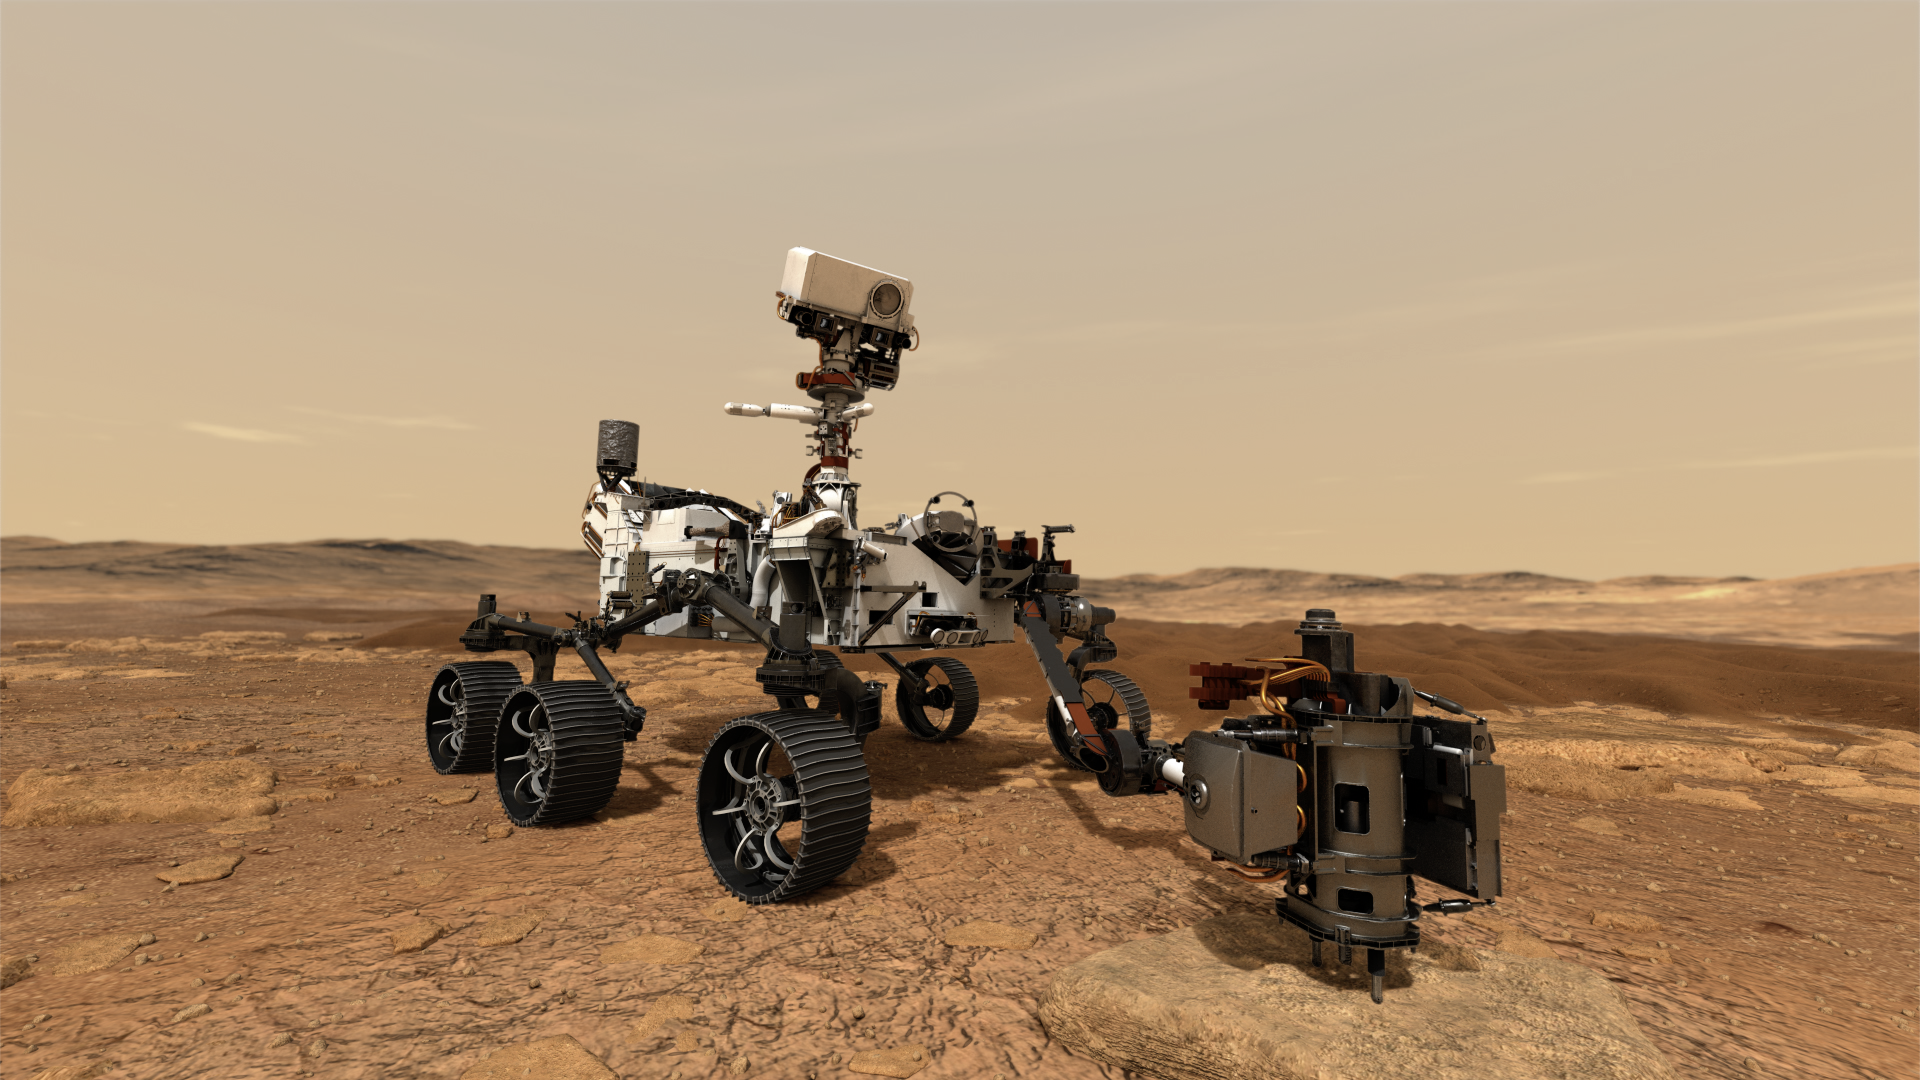 An artist's illustration of a Mars rover drilling on the Martian surface. It is a slender white vehicle with six wide gray wheels with narrow tires. A camera is mounted on a long "neck" atop the rover. The ground is reddish-orange and dusty, and the sky is a soft dusty orange.